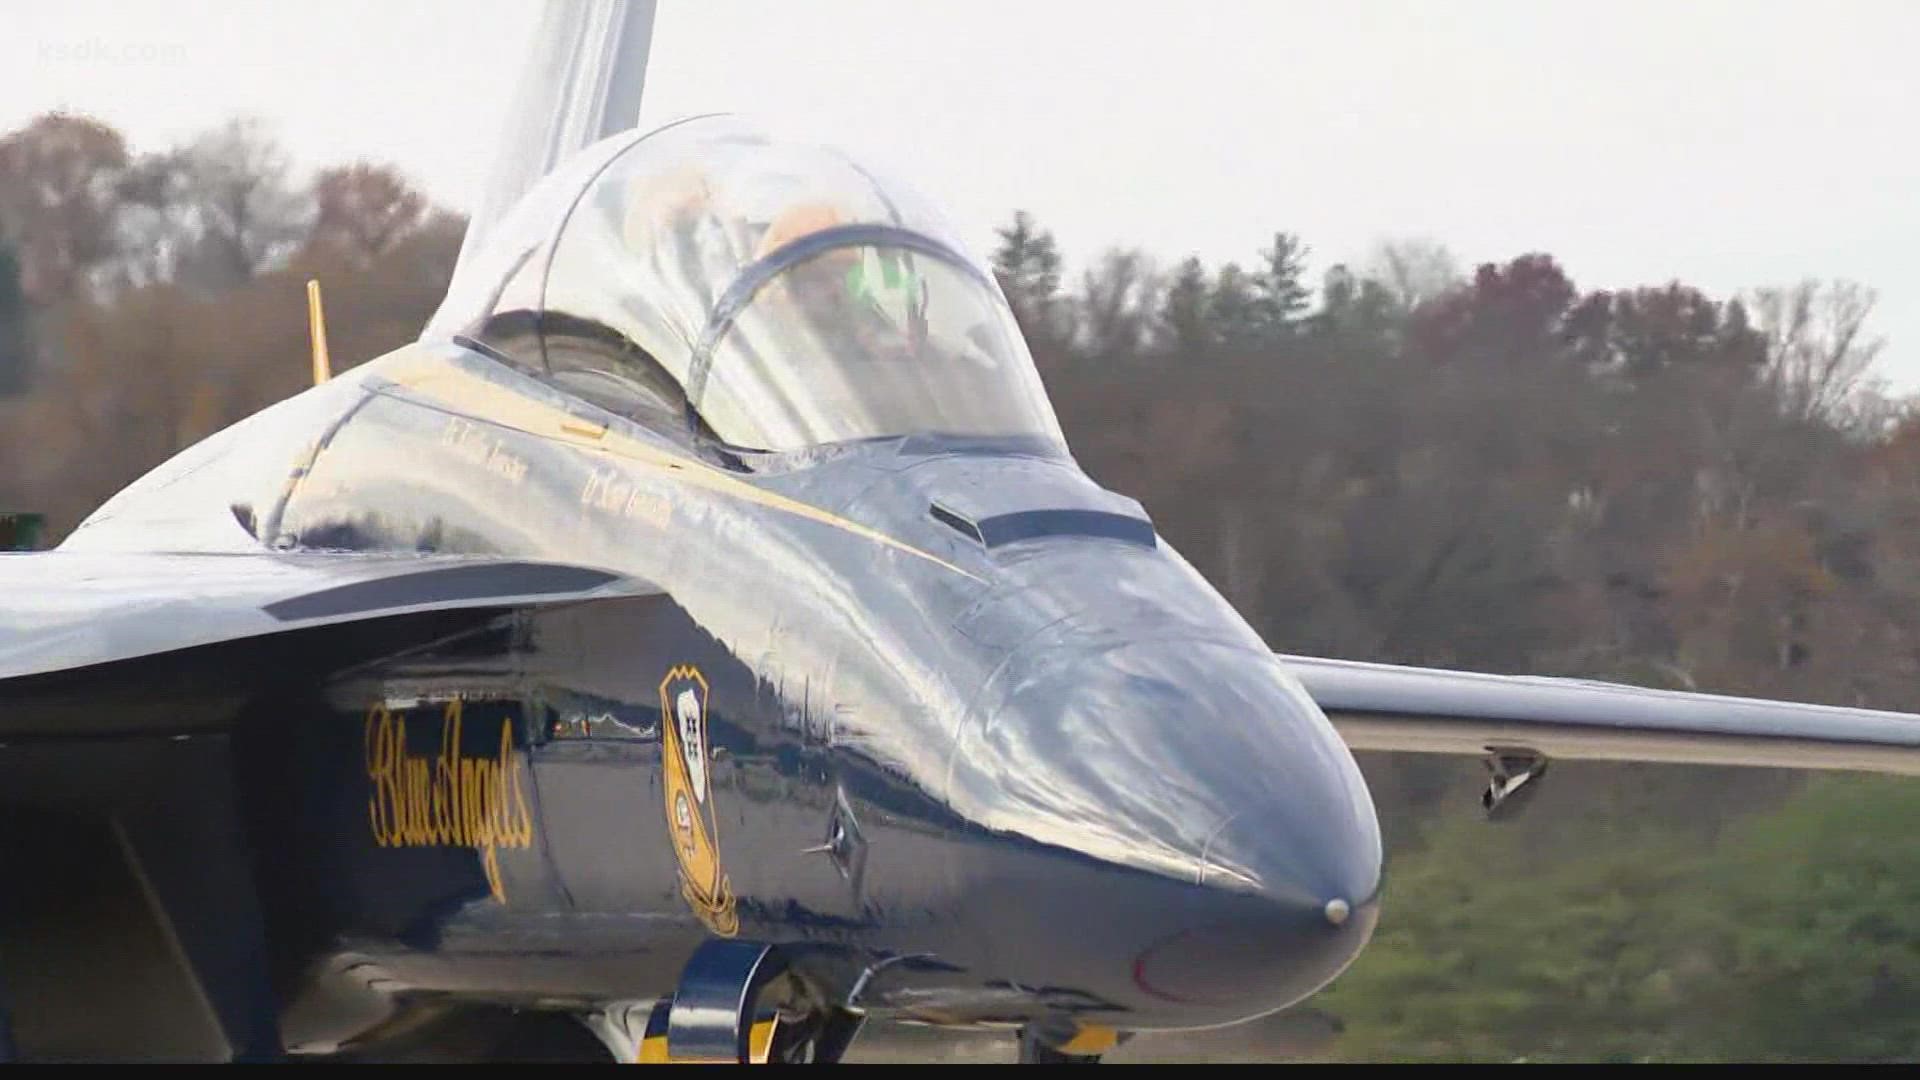 The U.S. Navy Blue Angels will buzz through the sky over St. Louis County in 2022, and now is your chance to secure a ticket to see the high-flying show.